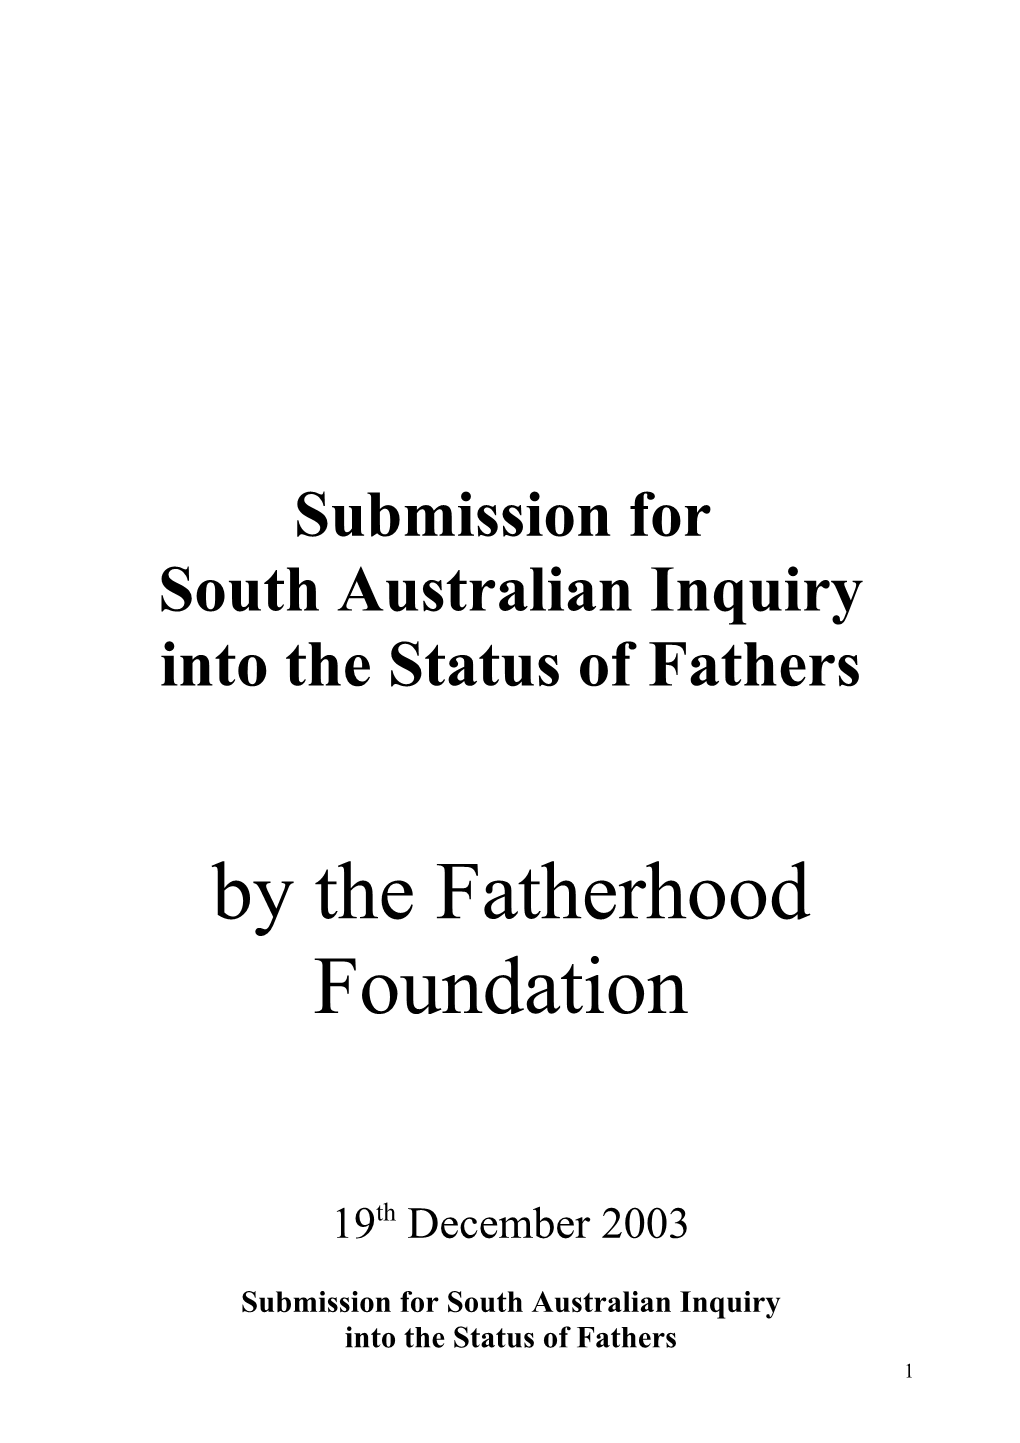 The Fatherhood Foundation Extend Our Congratulations to the South Australian Parliament